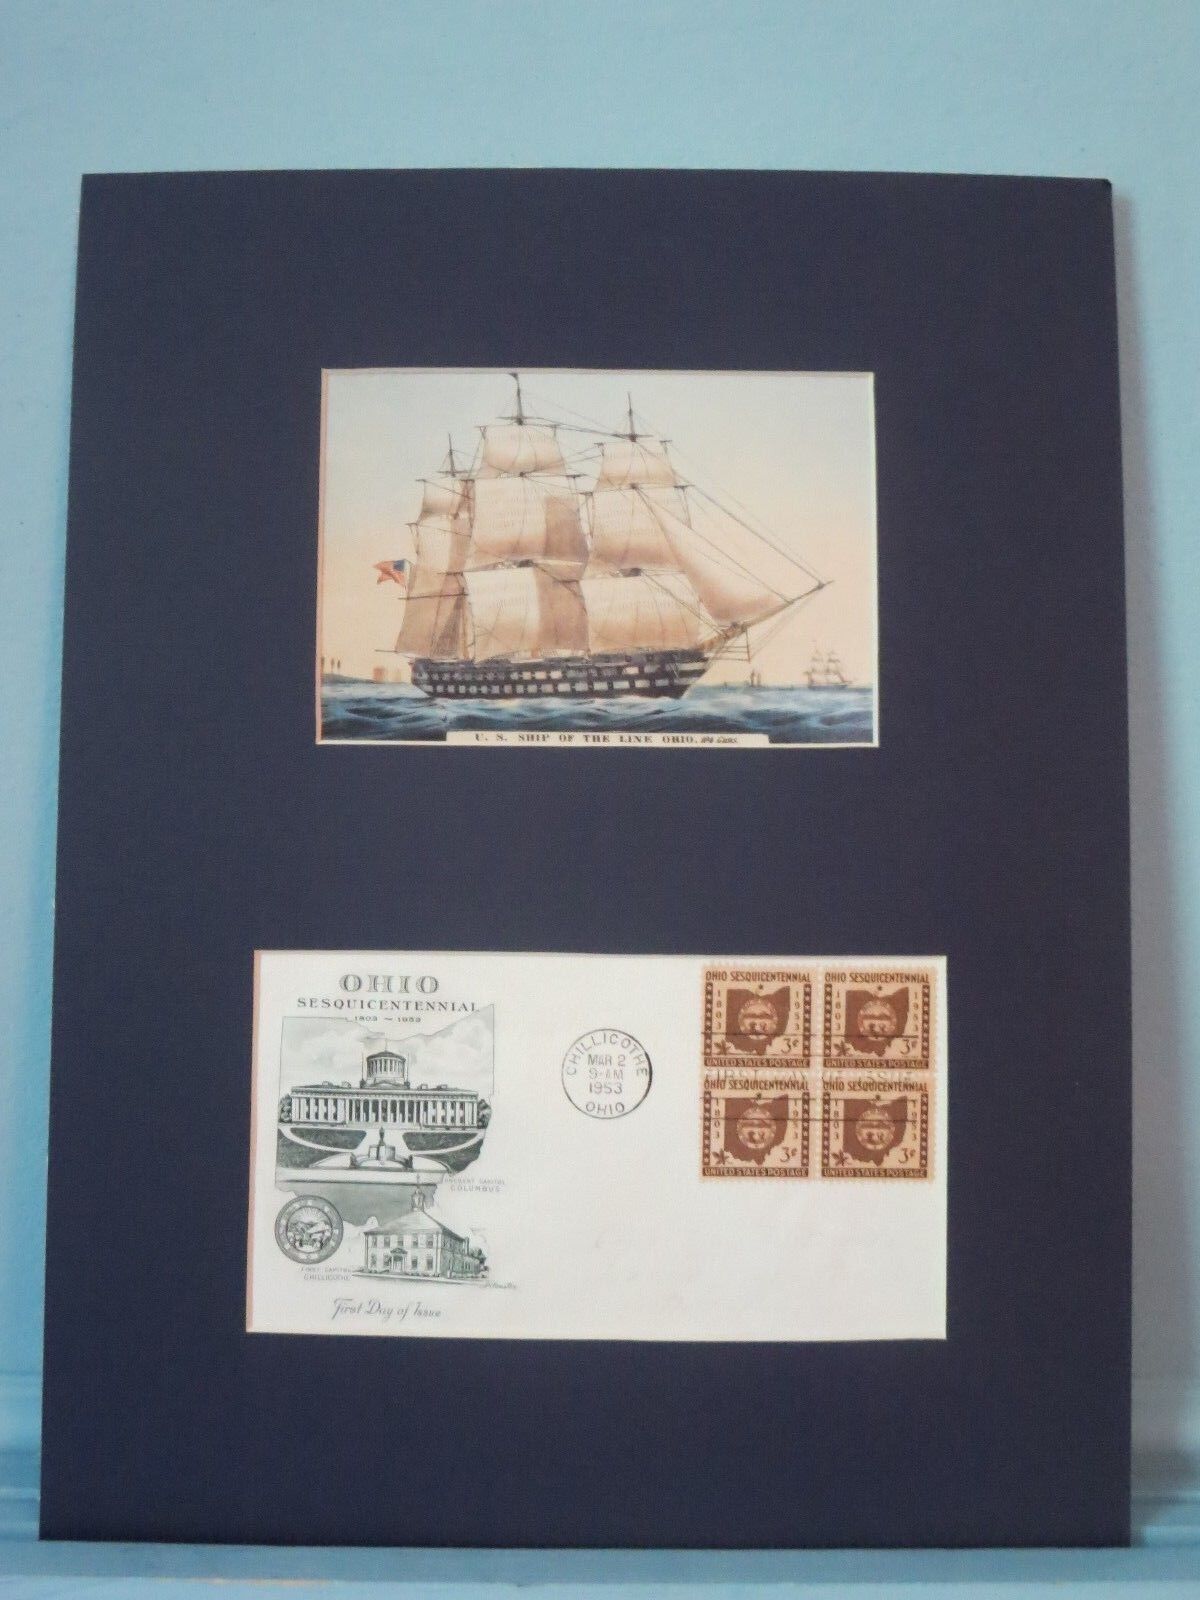 The USS Ohio & First Day Cover honoring the 150th Anniversary of Ohio Statehood